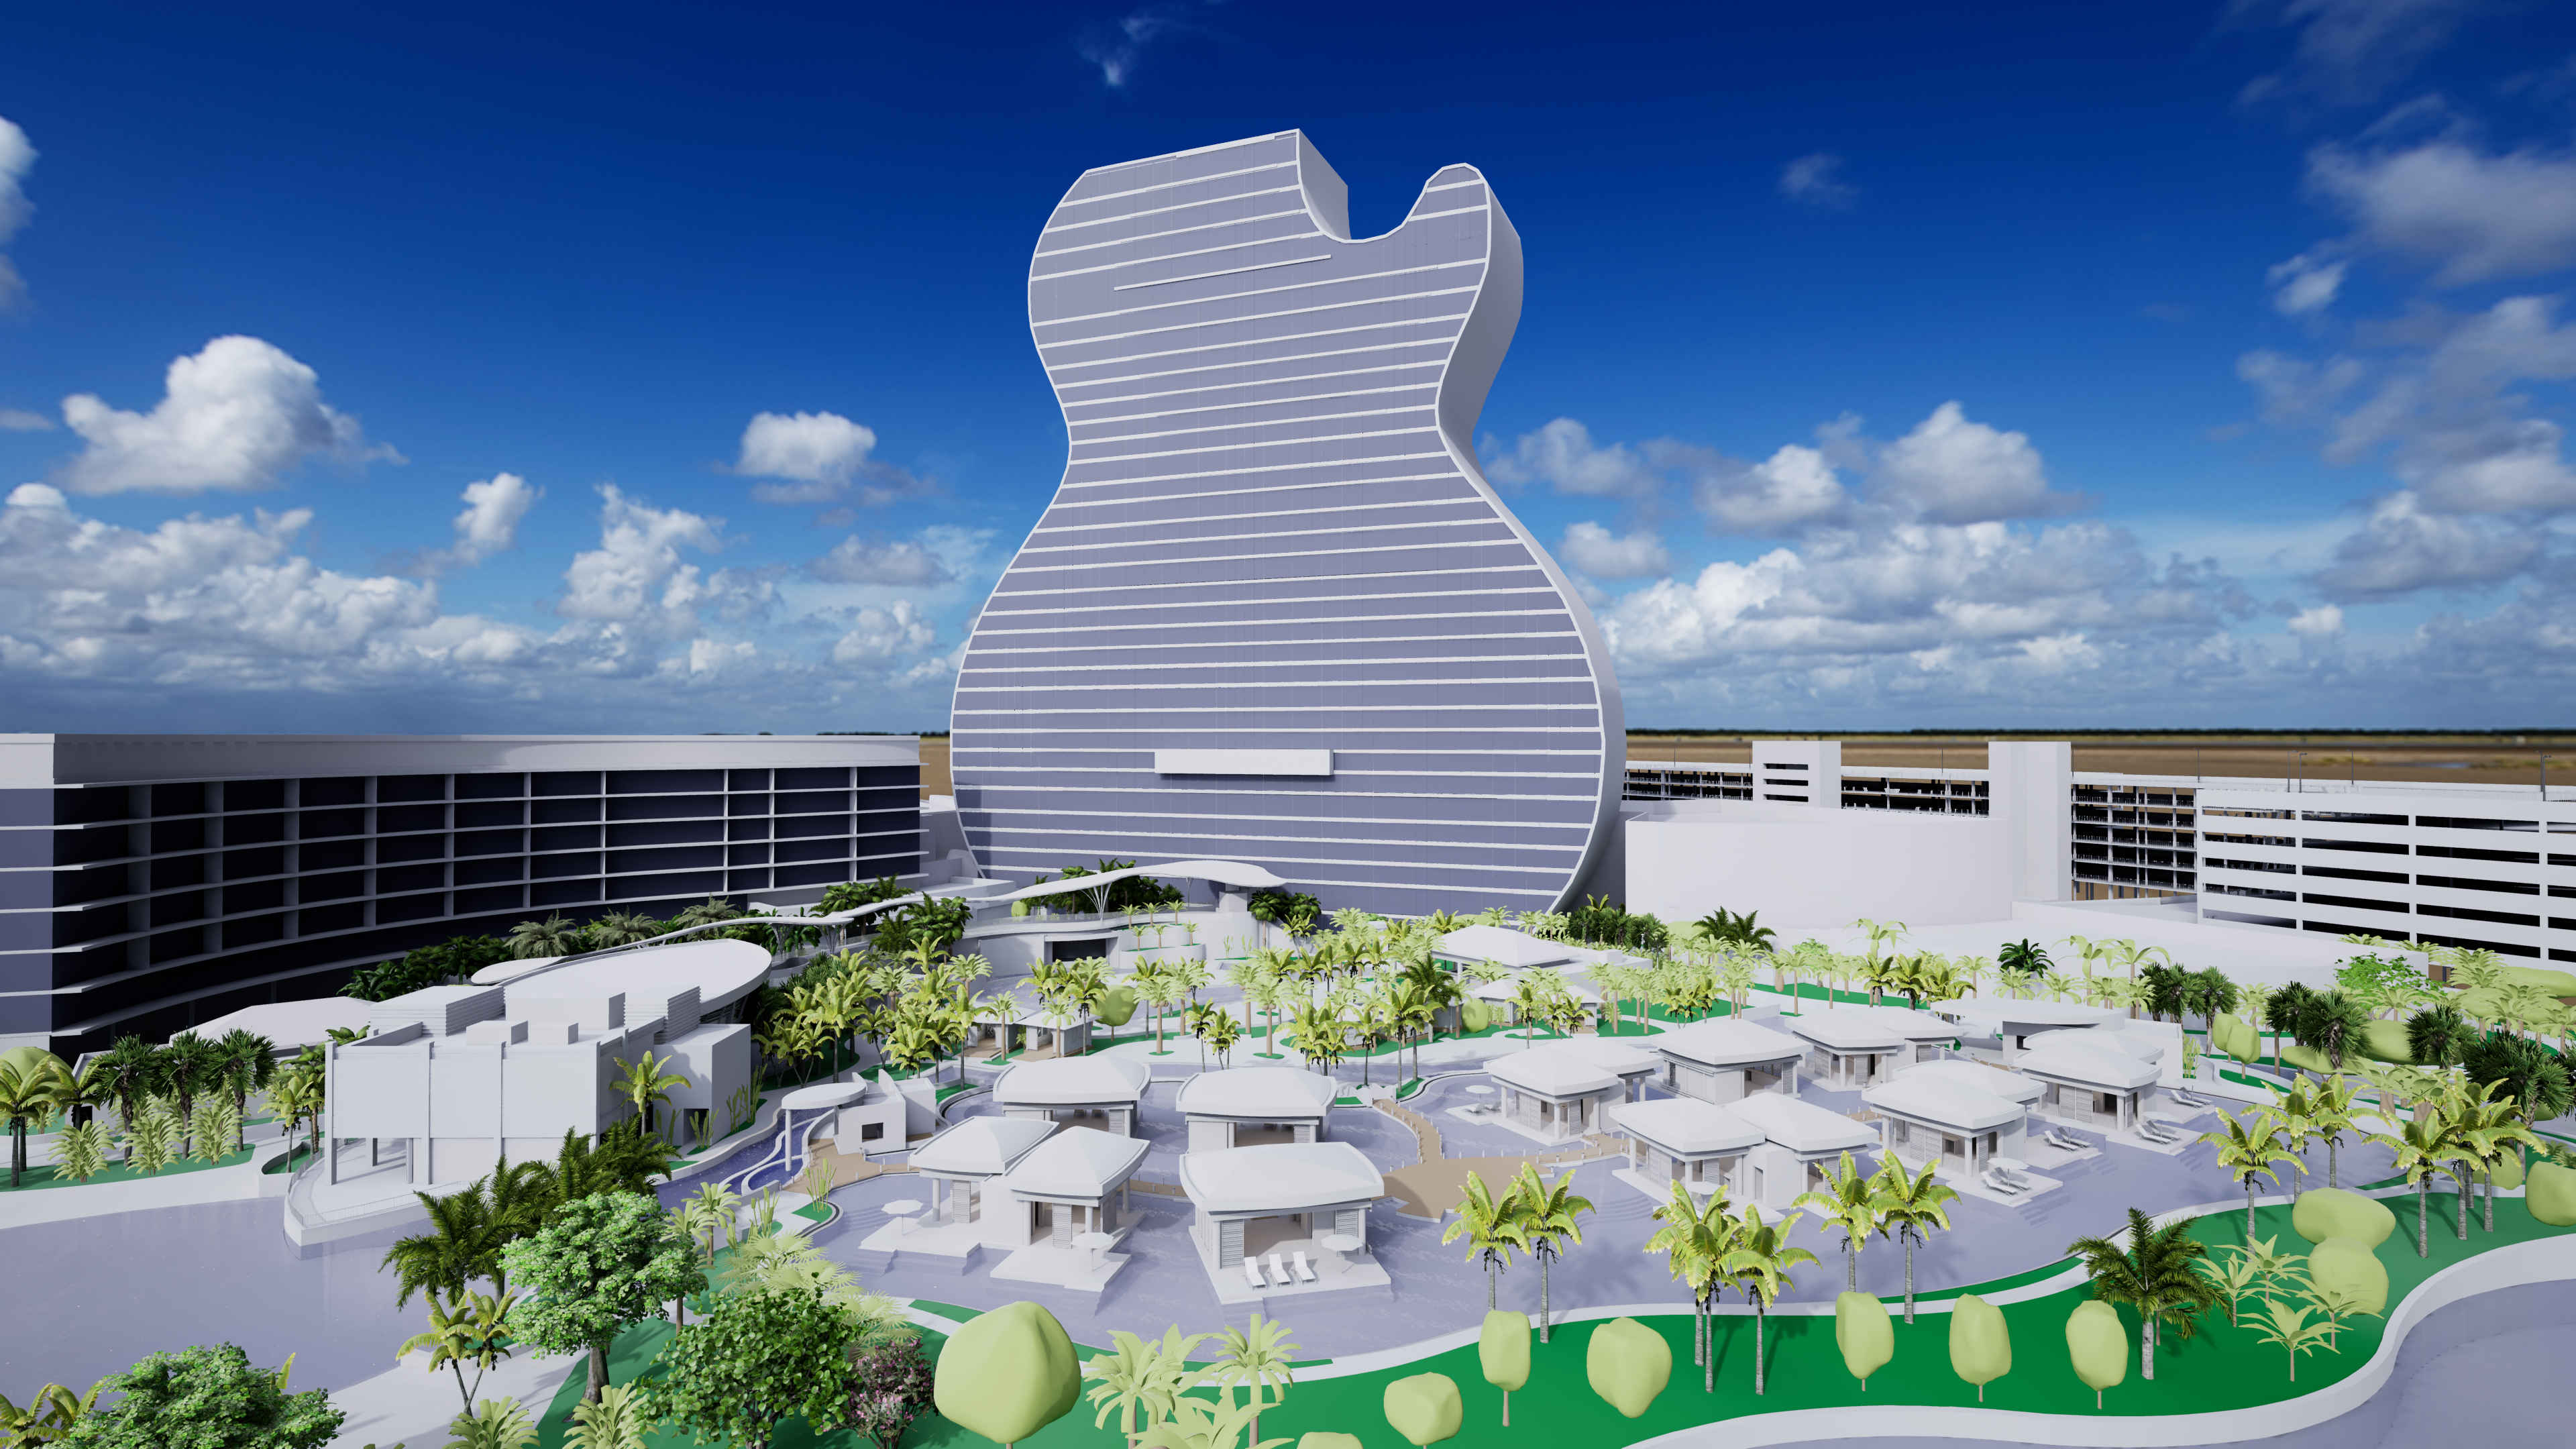 Hard Rock expansion used virtual reality to design develop property